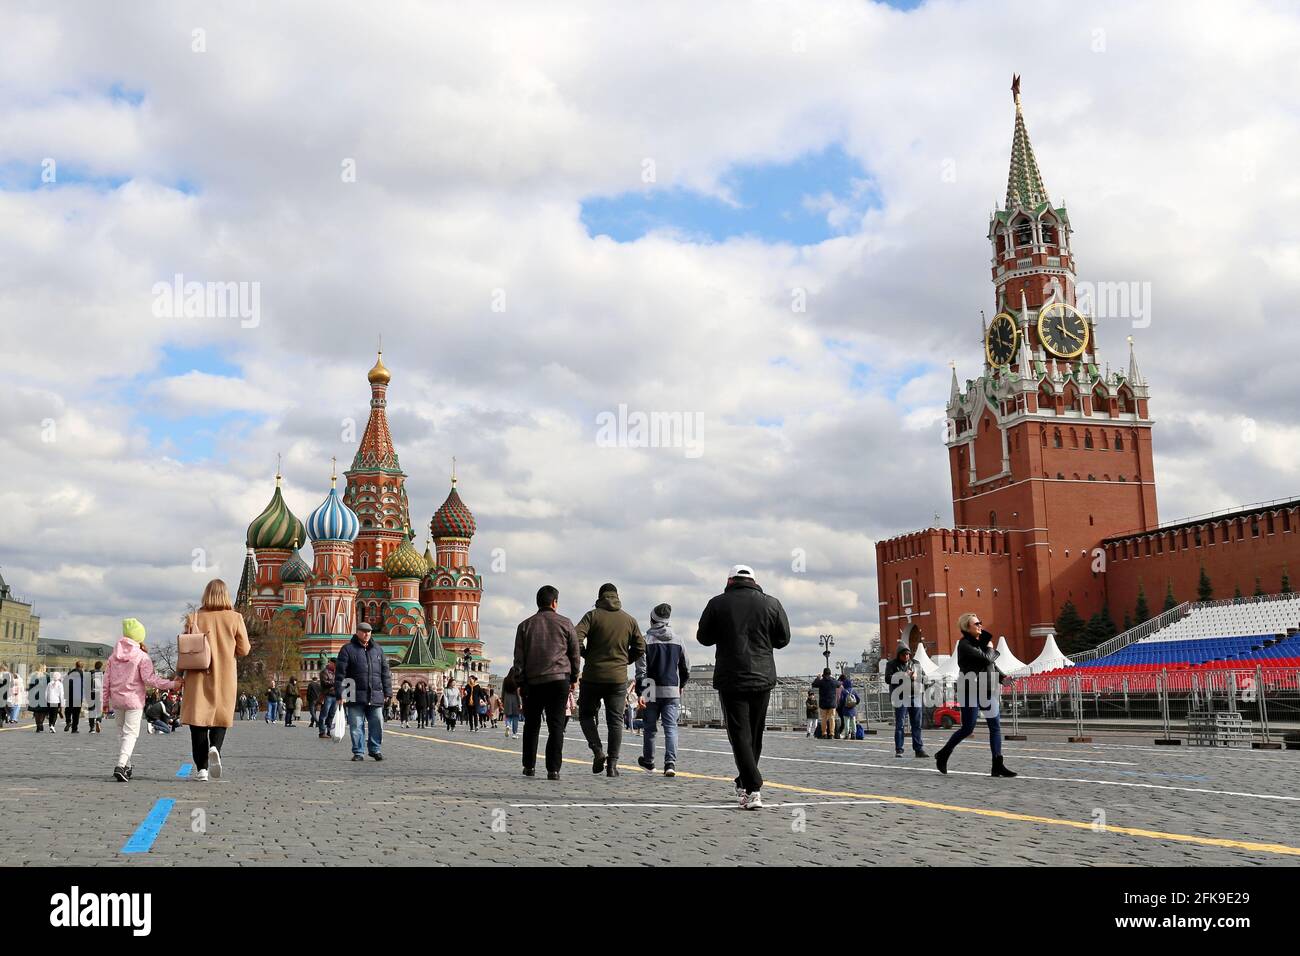 People walking on Red square on background of St. Basil's Cathedral and Kremlin tower. Tourists in city during covid-19 coronavirus pandemic Stock Photo